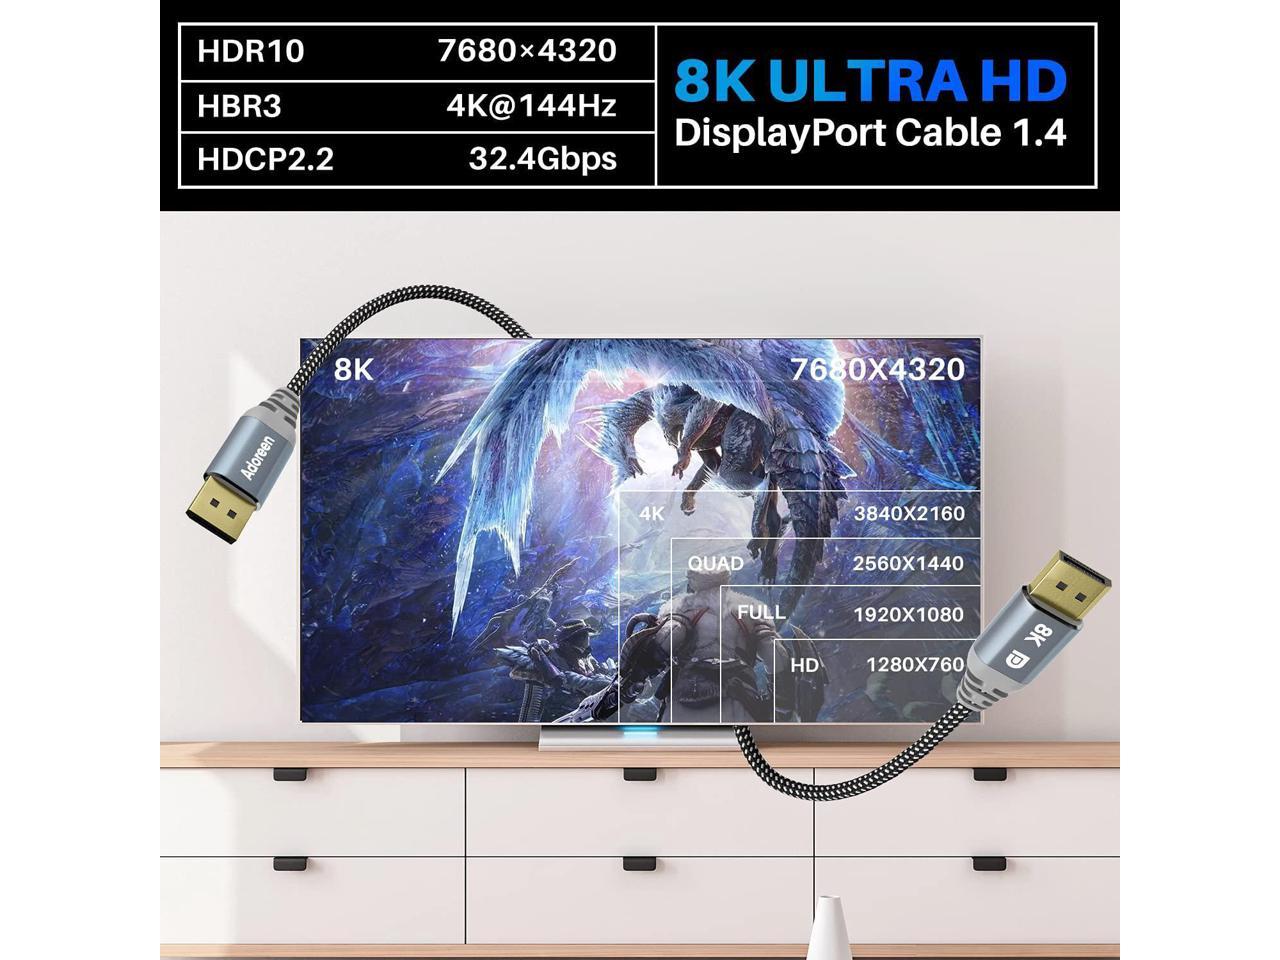 HBR3 HDCP2.2 HDR 32.4Gbps DP to DP Compatible 3D Laptop PC TV Gaming Monitor with 5 Velcro Cable Ties 4K@144Hz 2Pack for 8K@60Hz Adoreen UHD DP Cable 10feet 8K DisplayPort Cable 1.4 2K@240HZ 